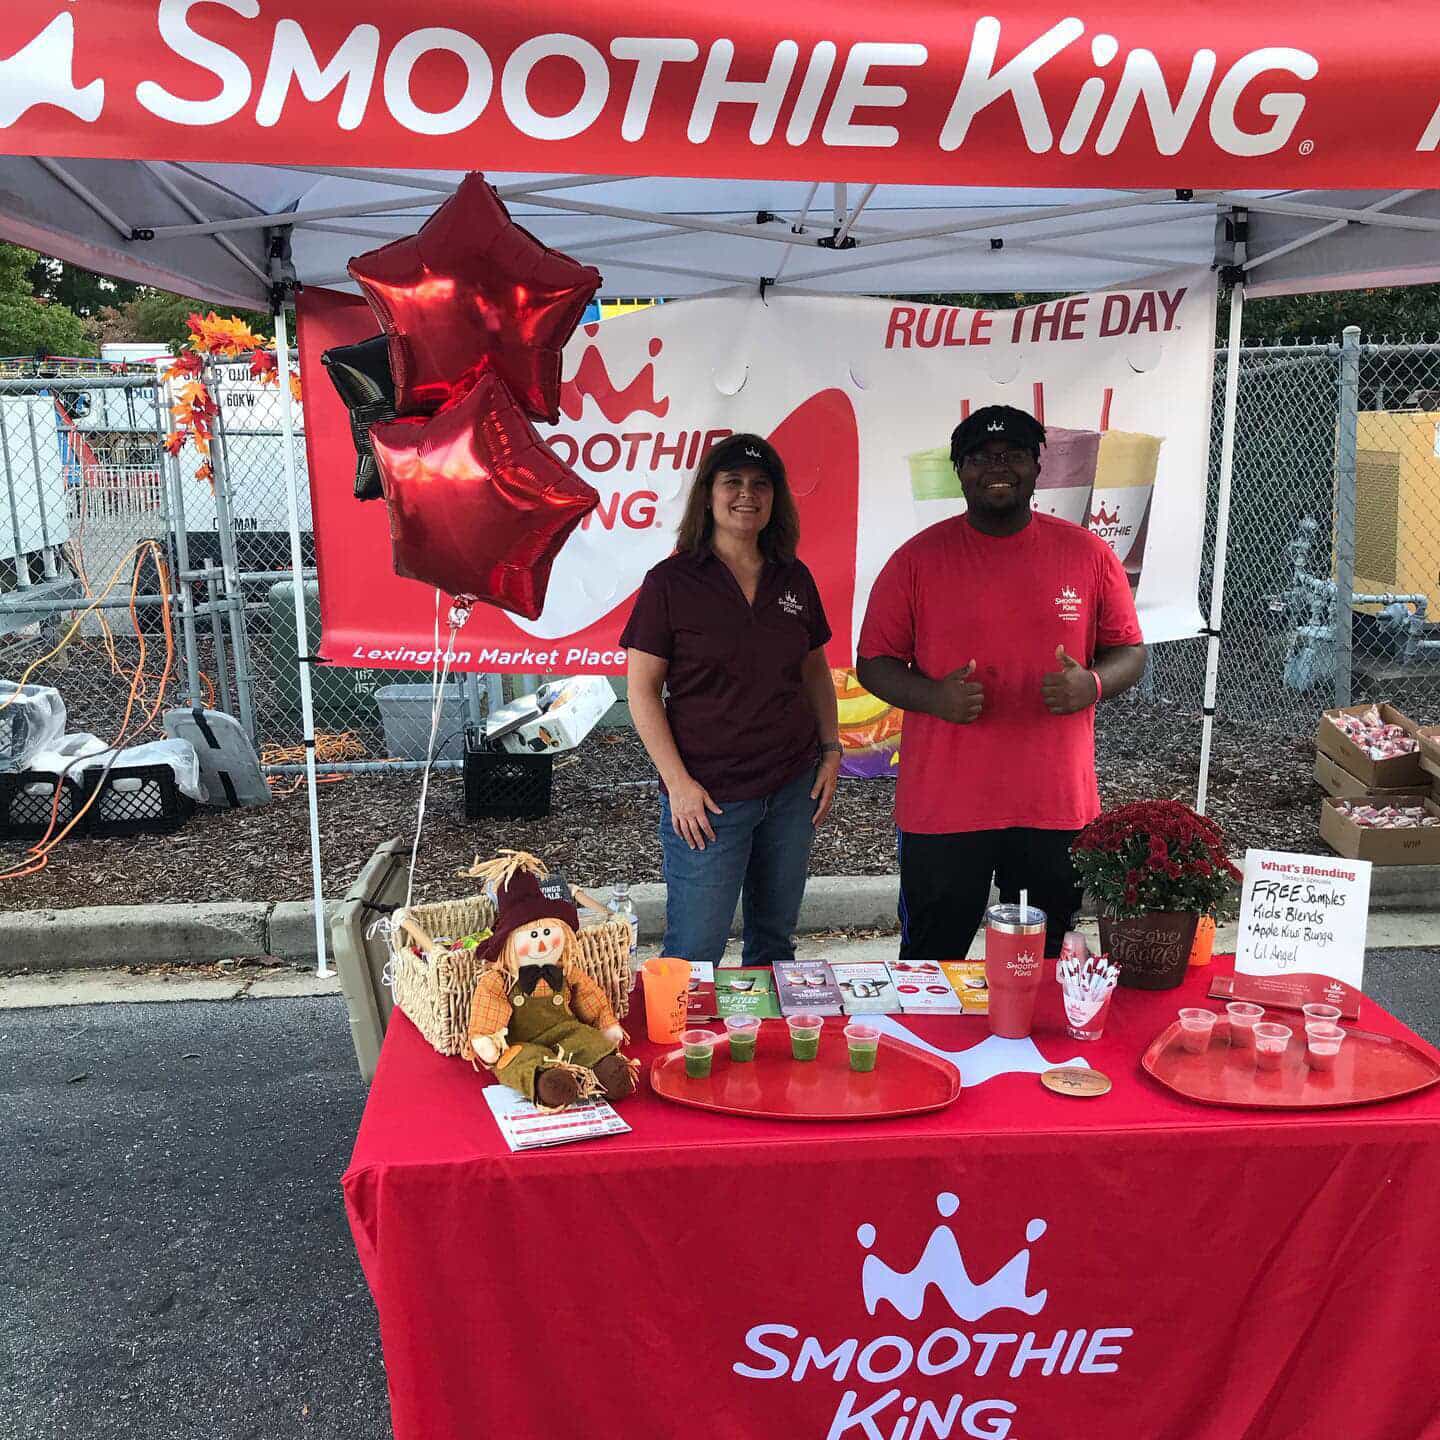 A South Carolina Smoothie King franchisee builds brand awareness and relationships